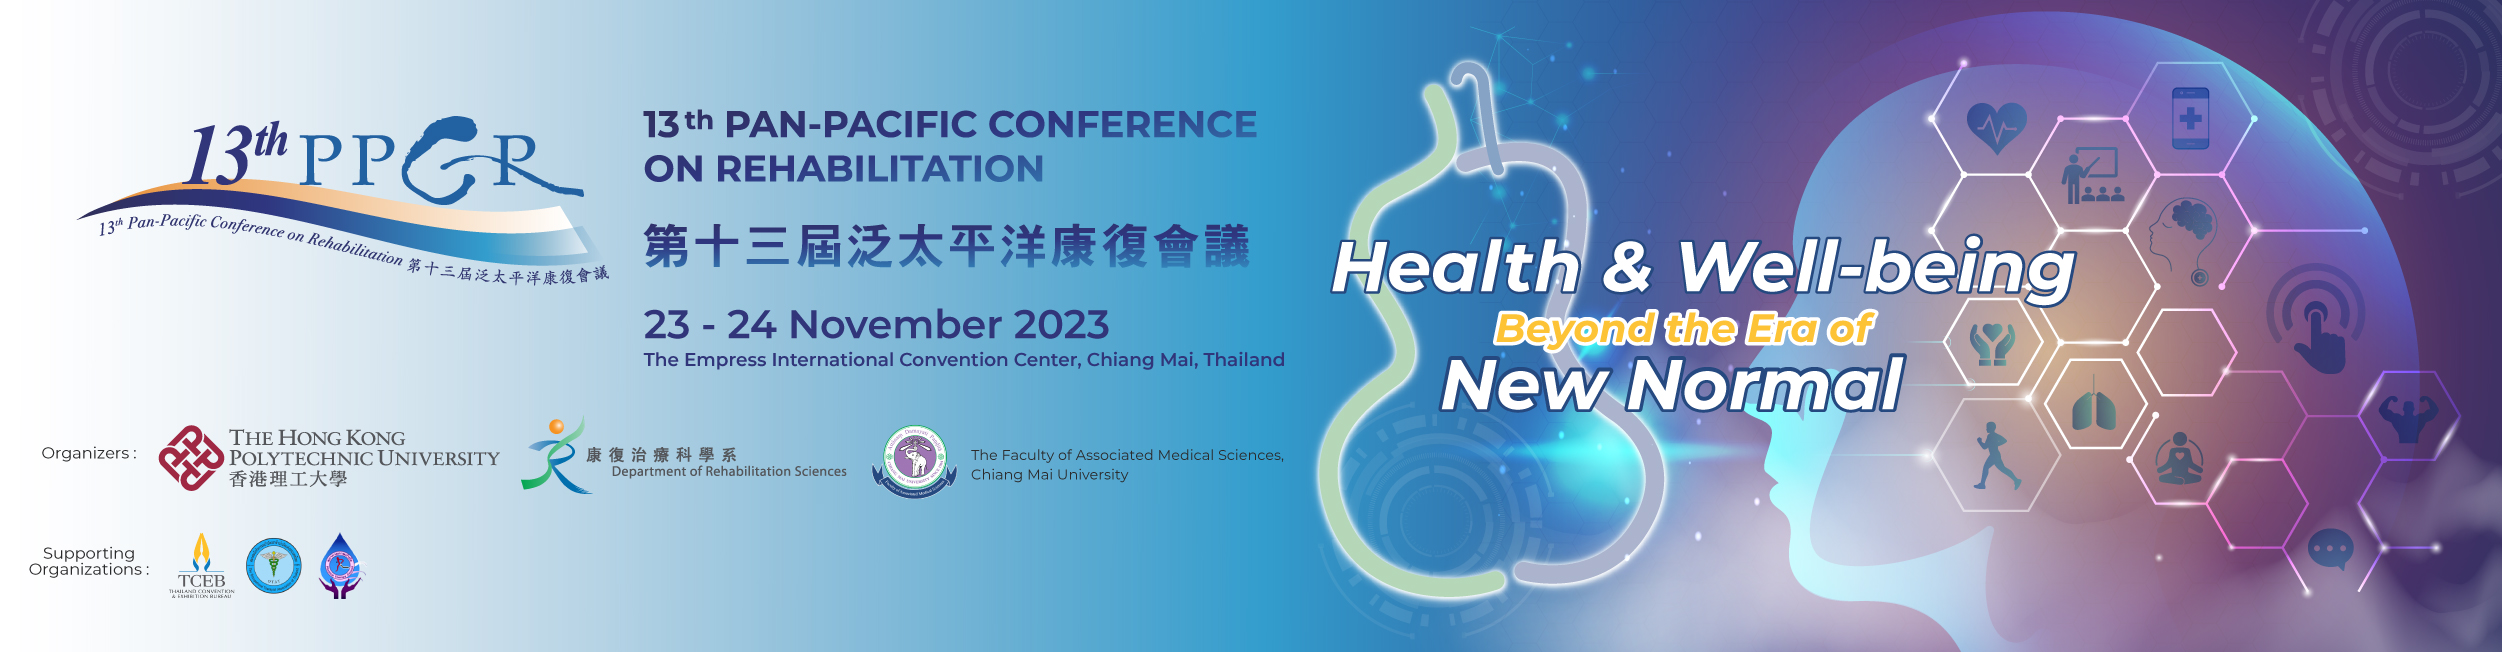 13th PanPacific Conference on Rehabilitation (PPCR2023)